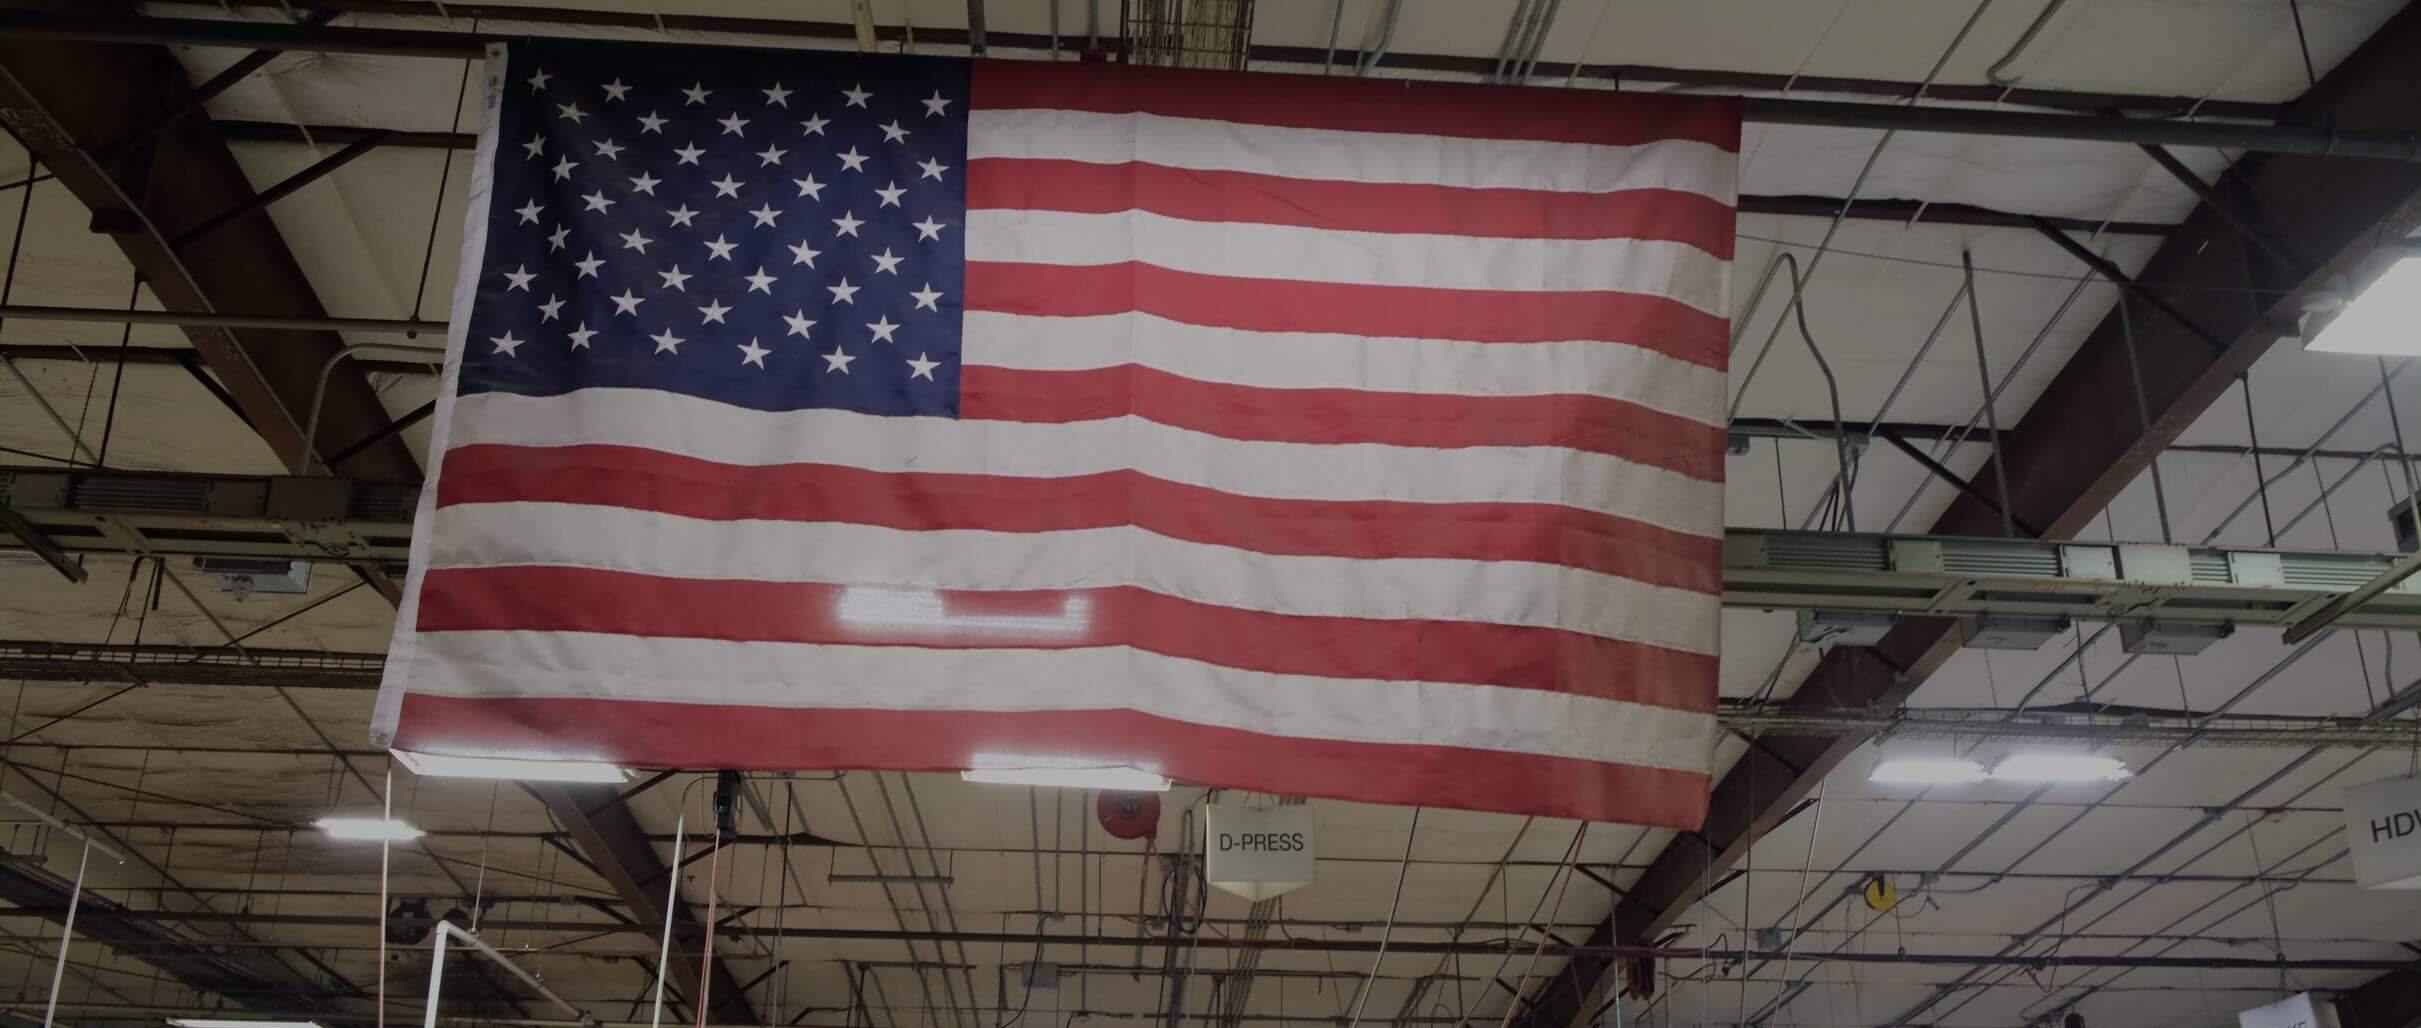 Made in the USA: 8 Reasons to Champion American Manufacturing